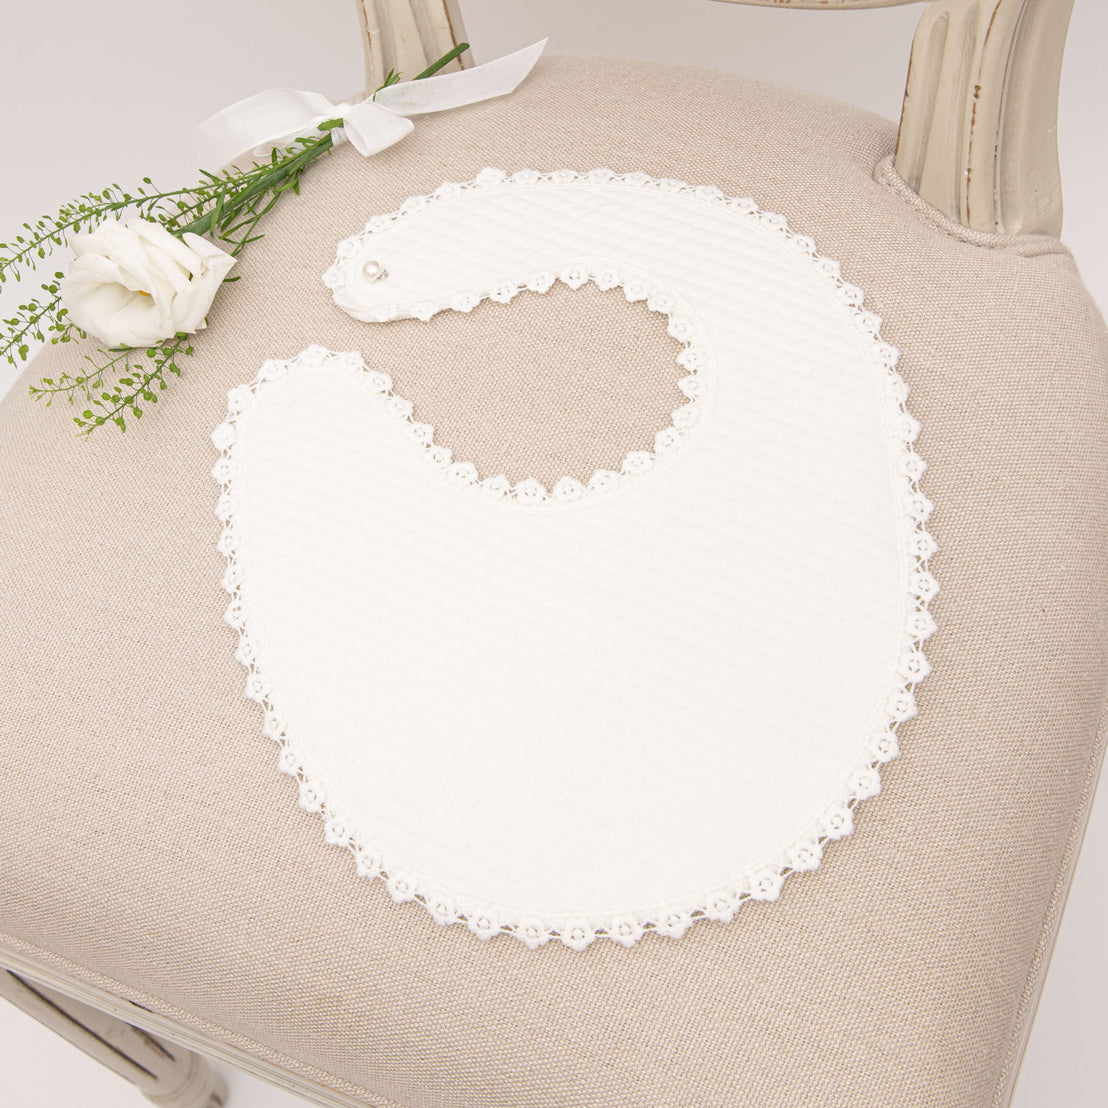 Photograph of christening bib made of cotton and ivory lace on chair.